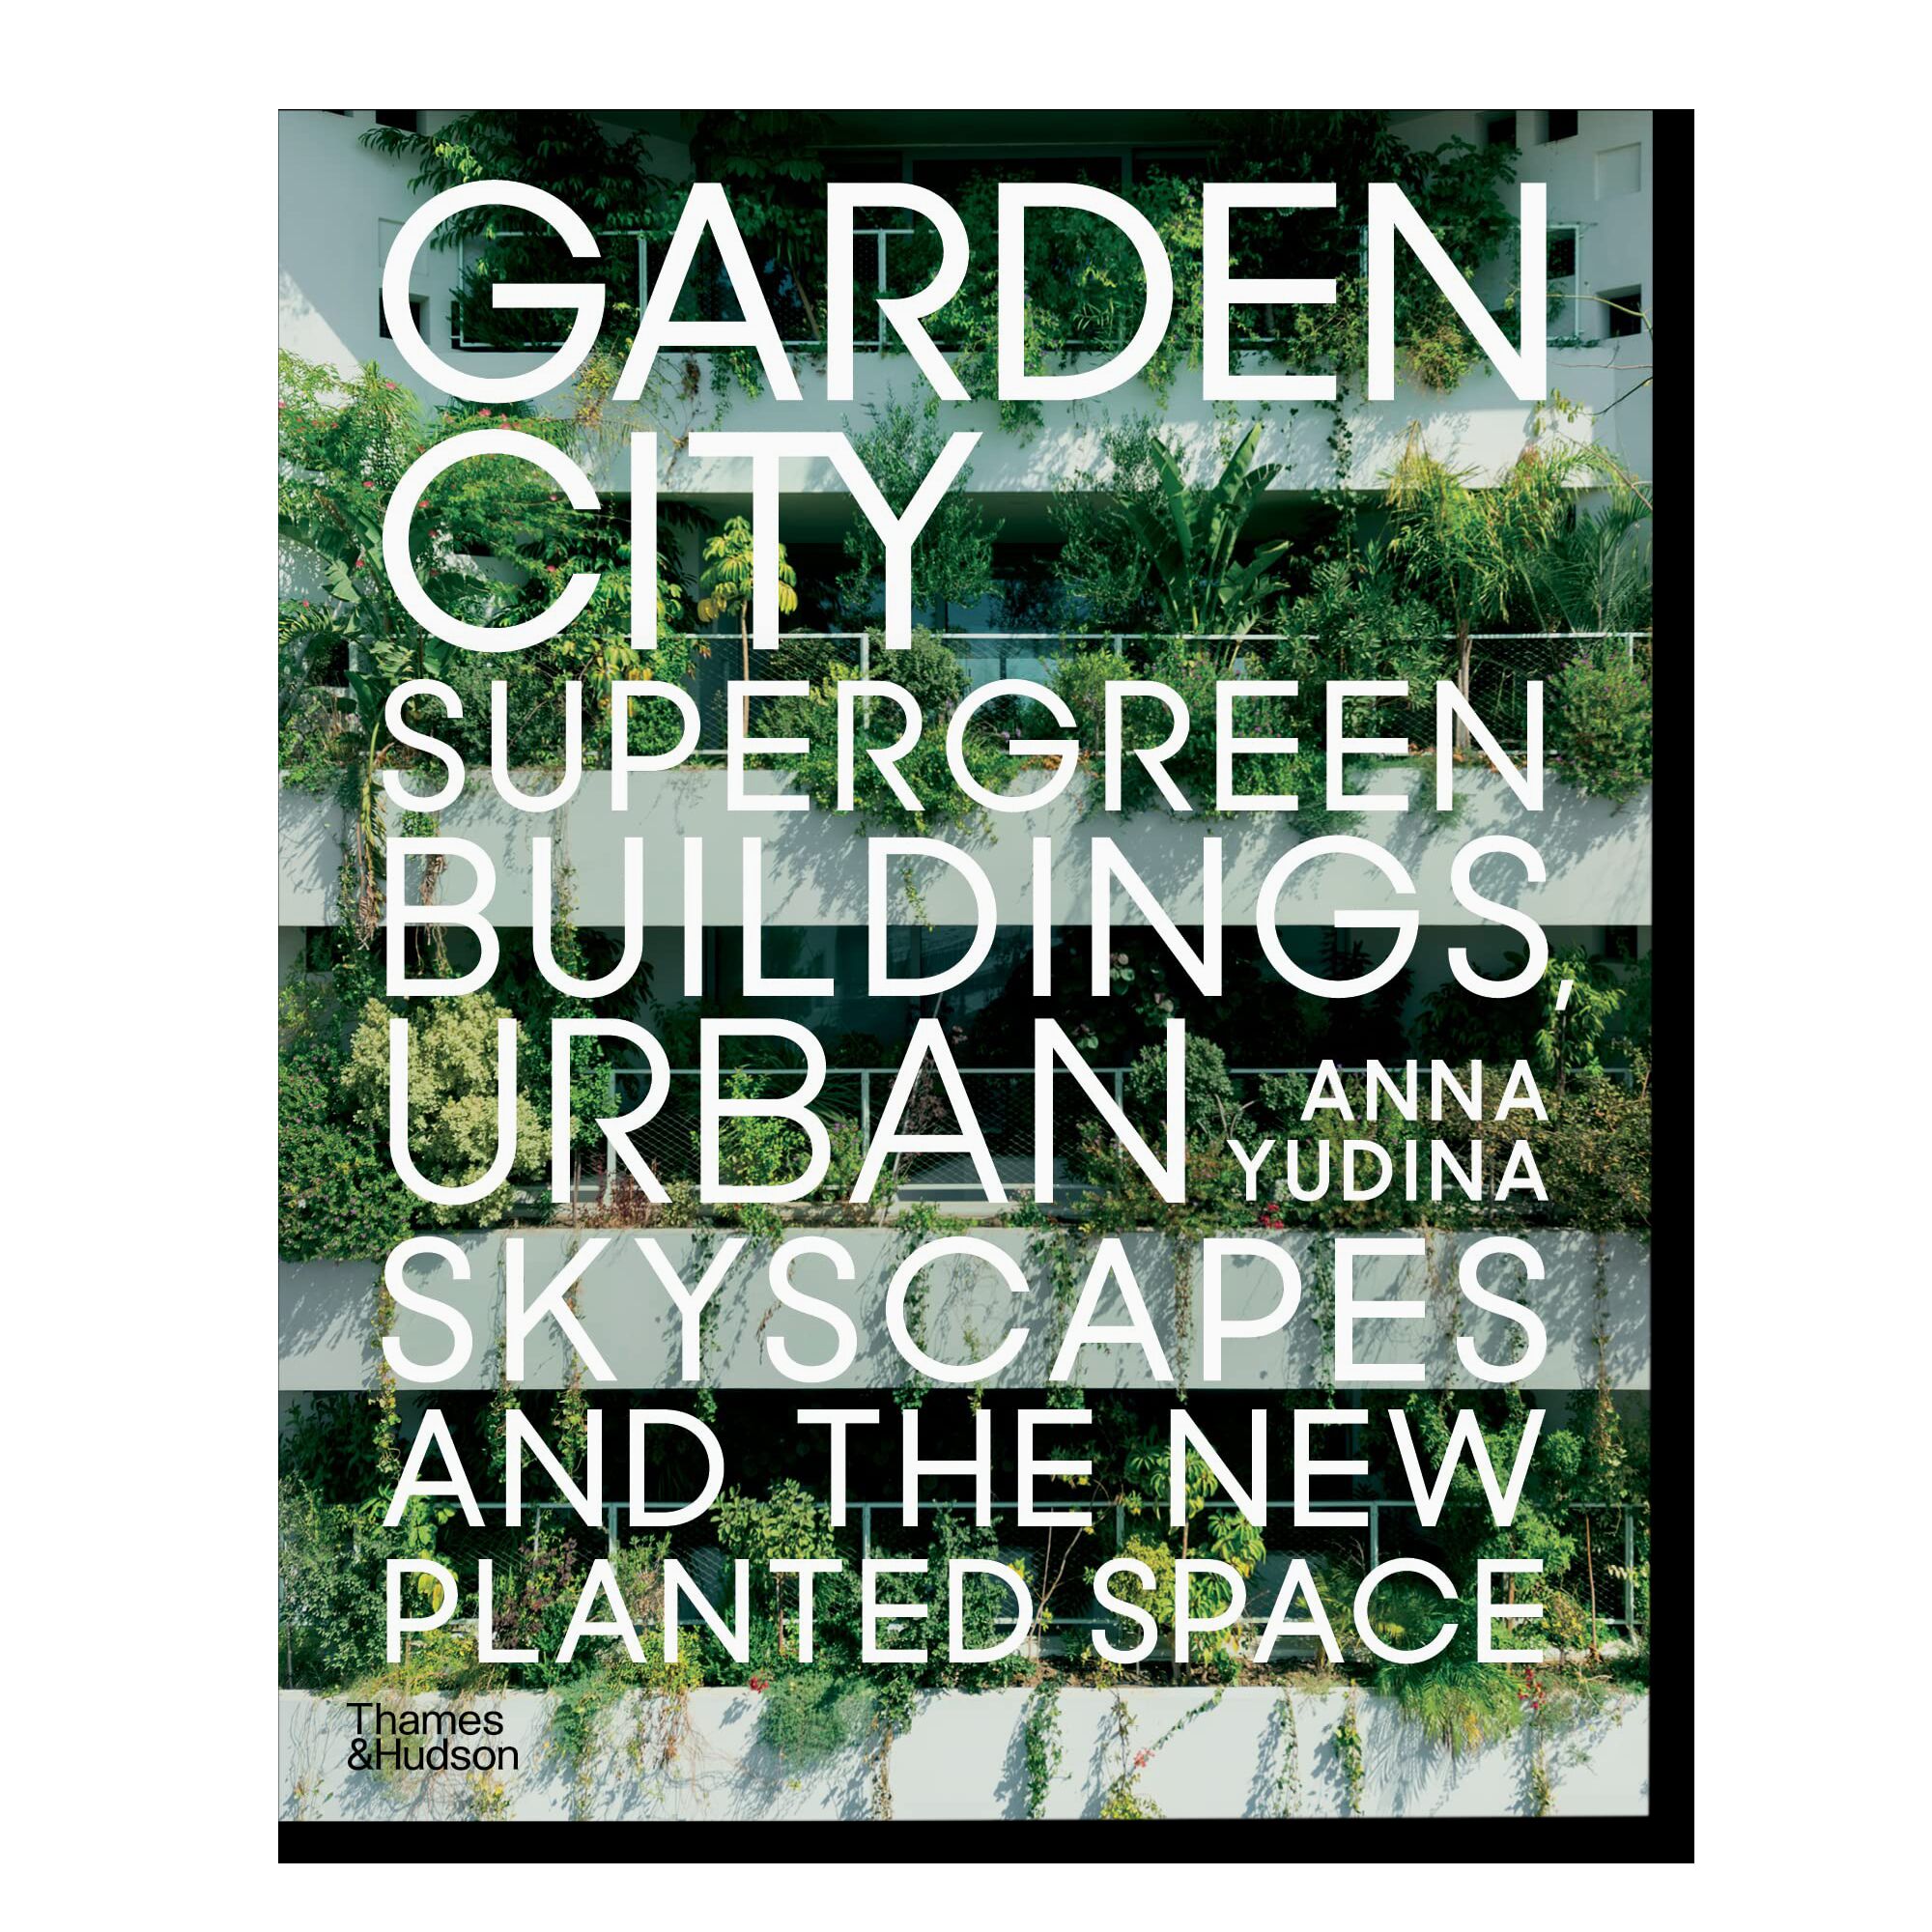 Garden City: Supergreen Buildings, Urban Skyscapes and the New Planted Space (paperback)